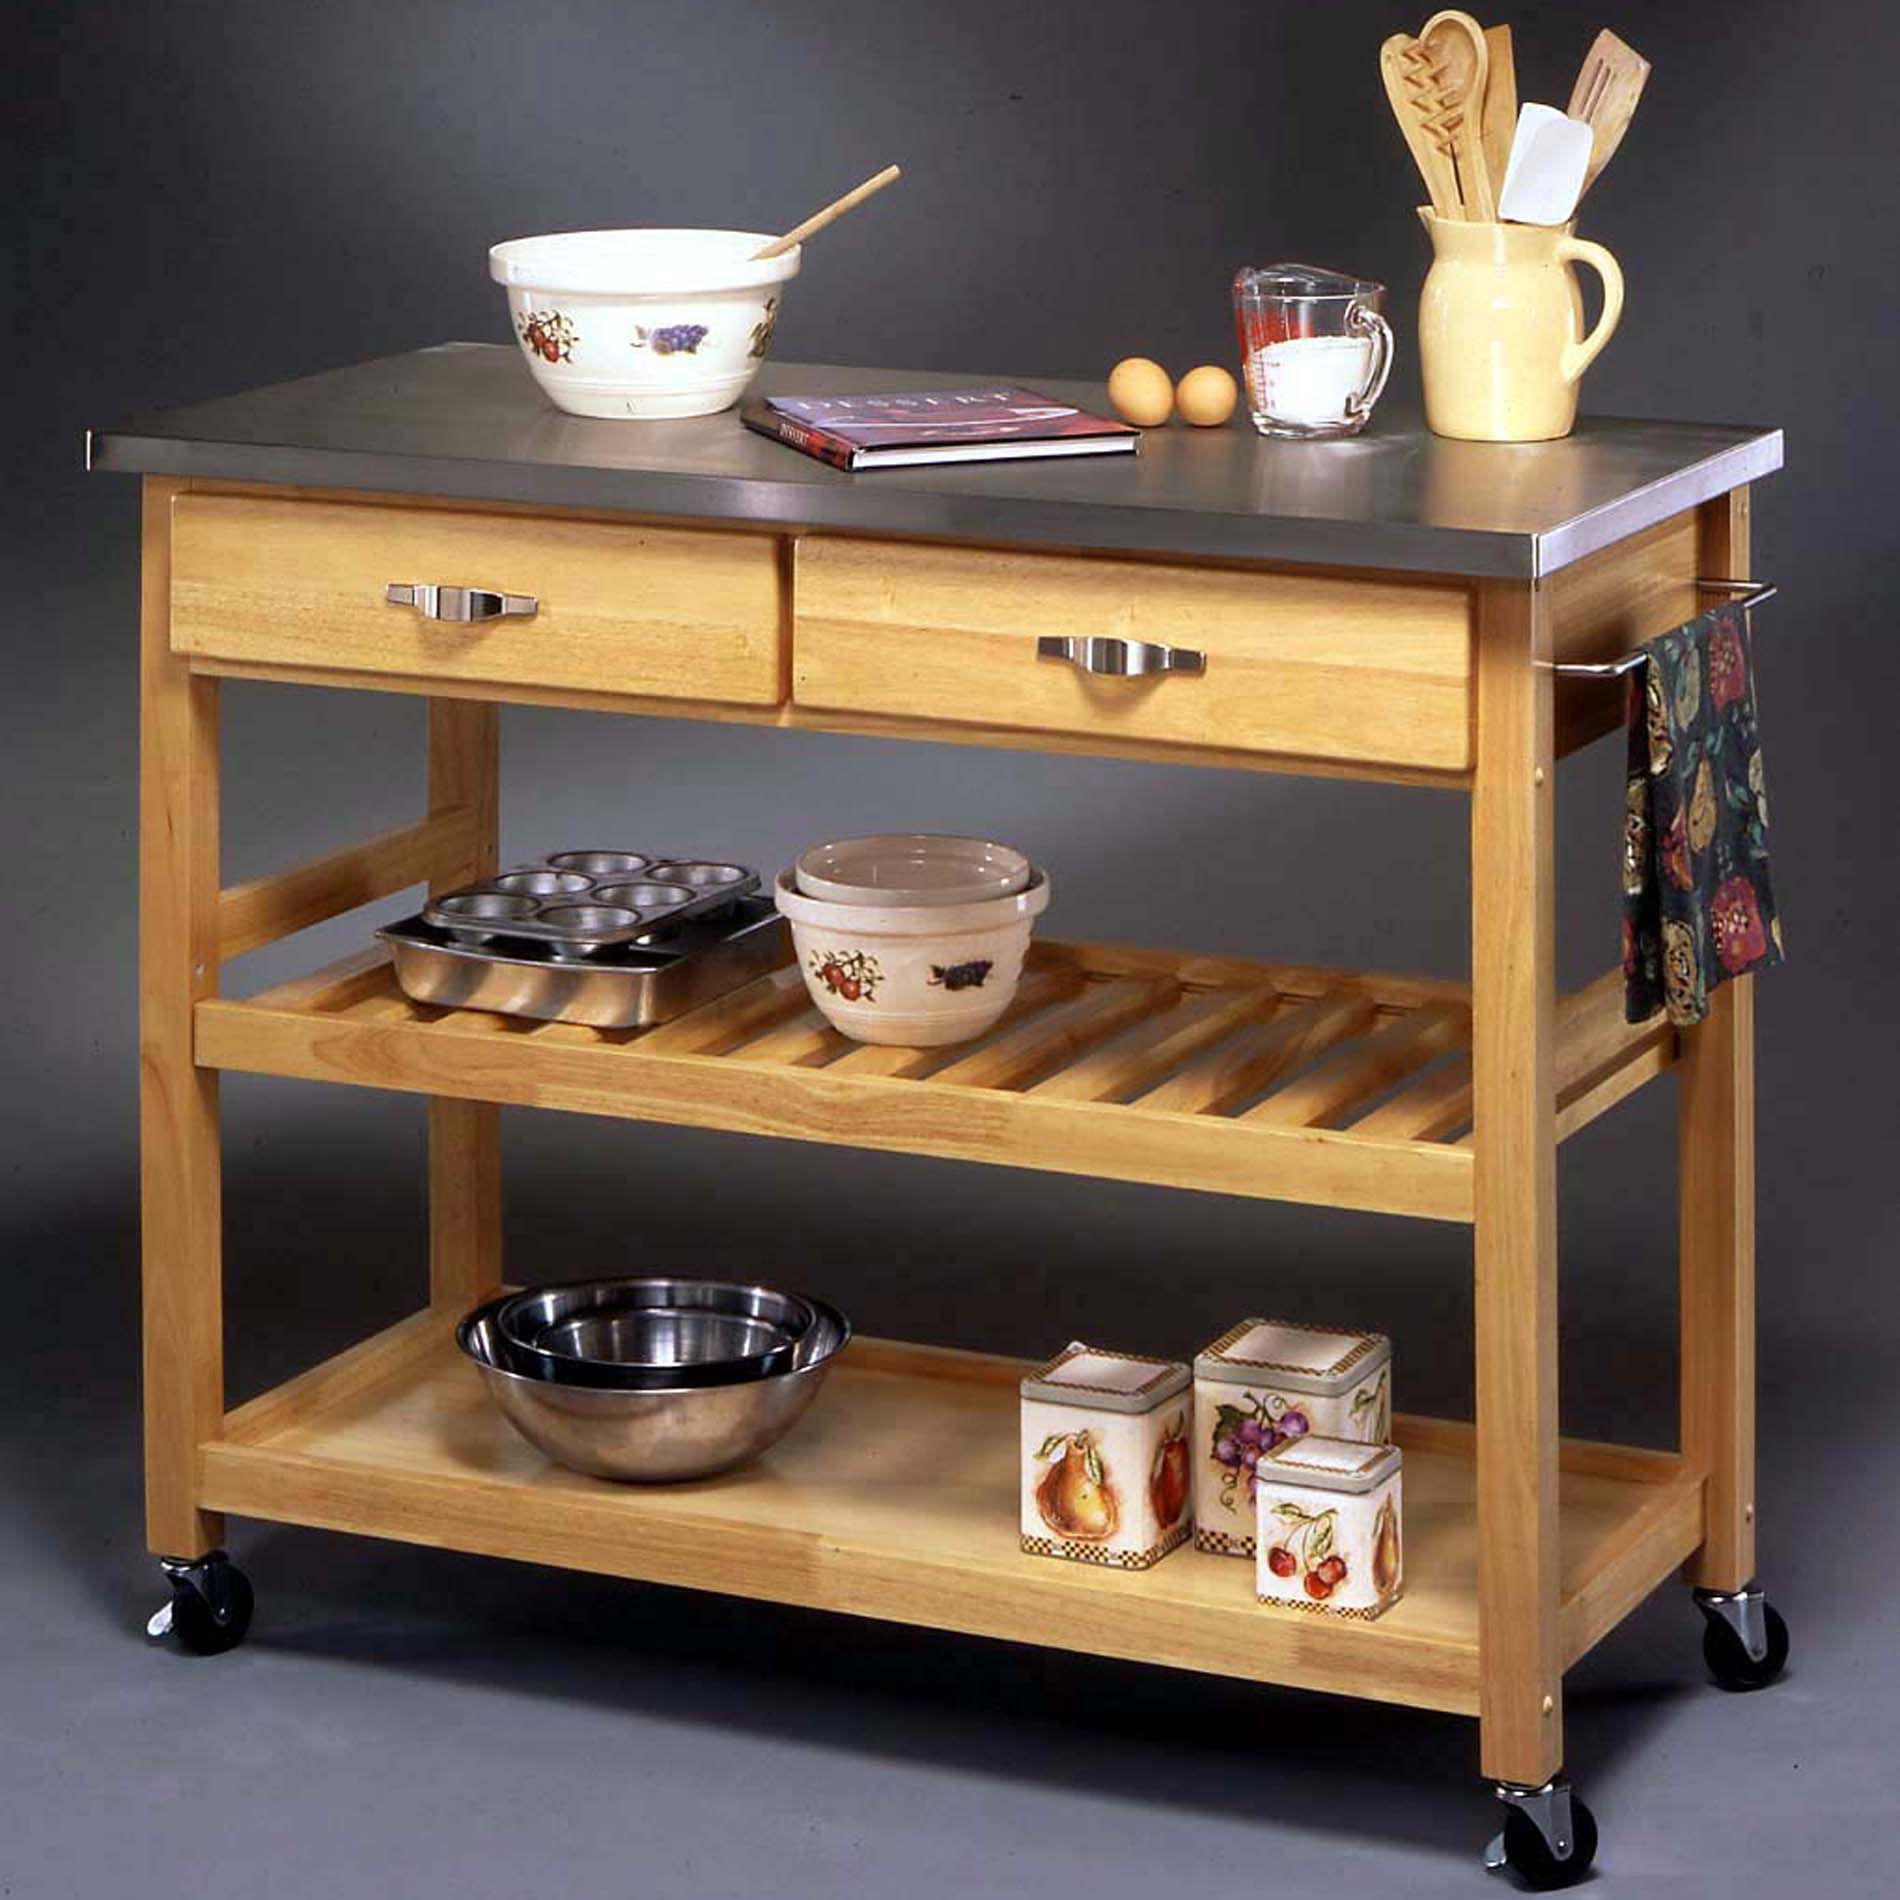 Movable Kitchen Counter
 Essential Home 3 Tier Portable Kitchen Cart Home